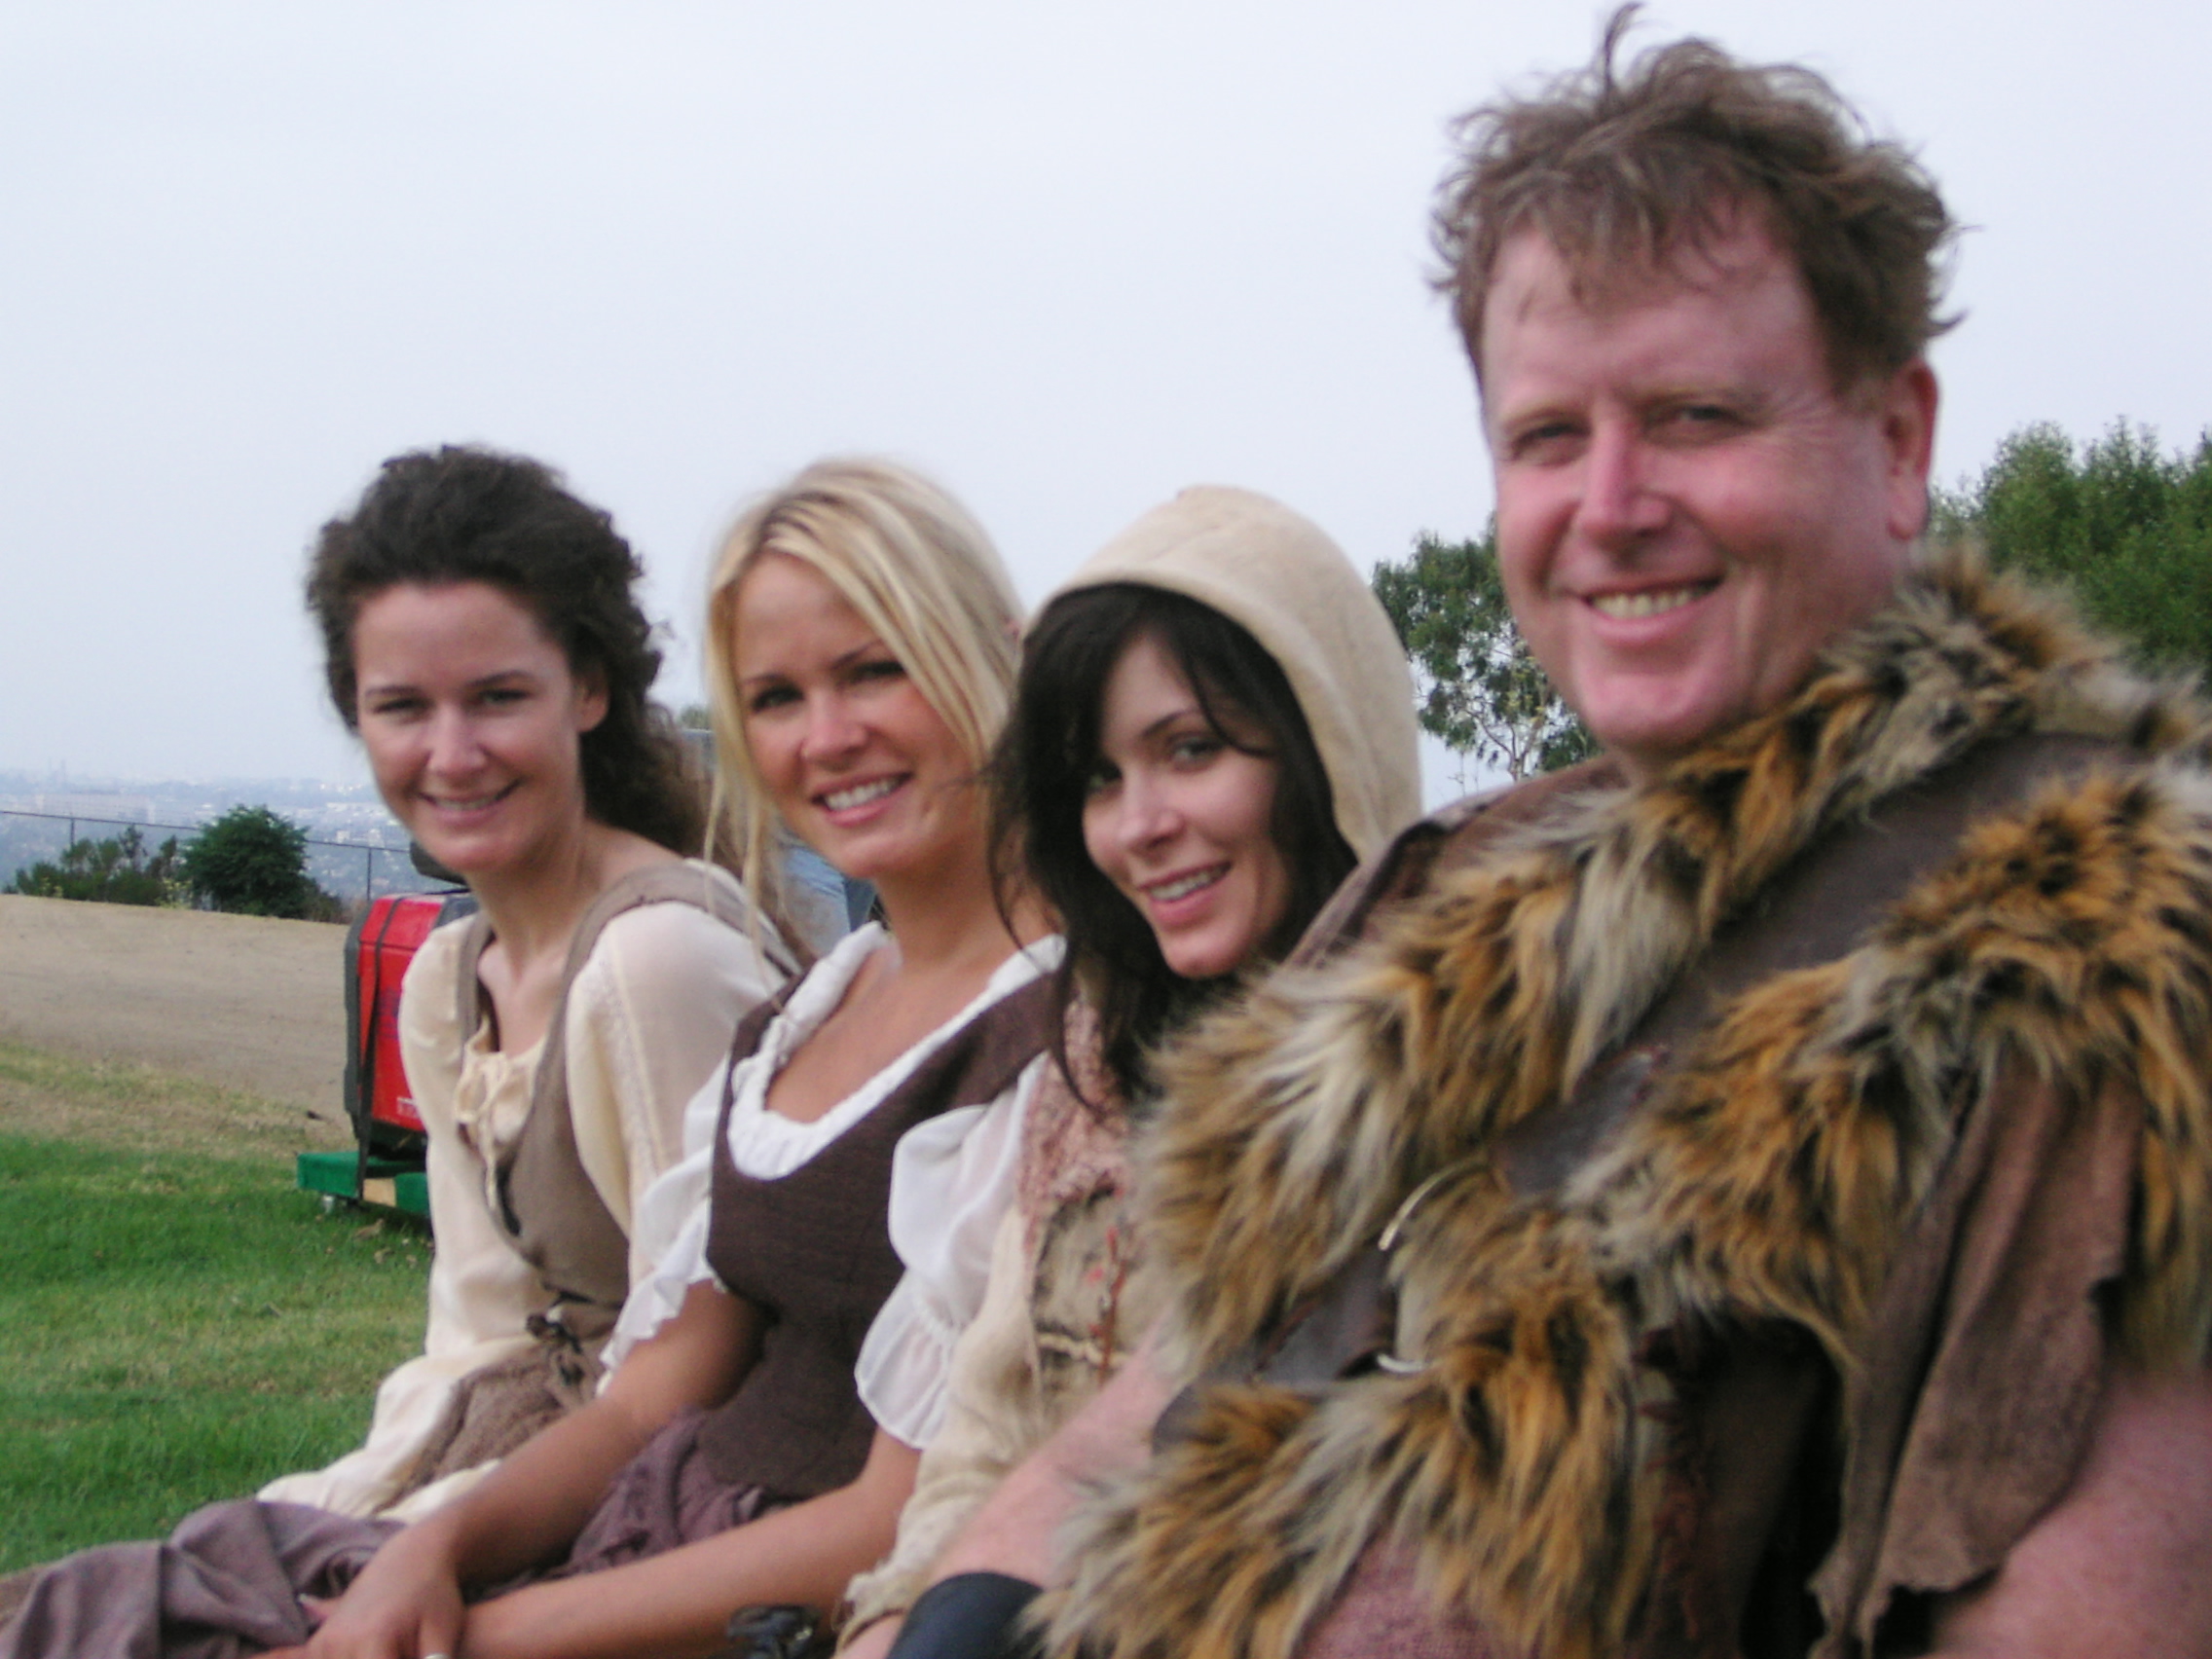 Chillin' with some wenches between shots for a FOX SPORTS SUPER BOWL commercial.